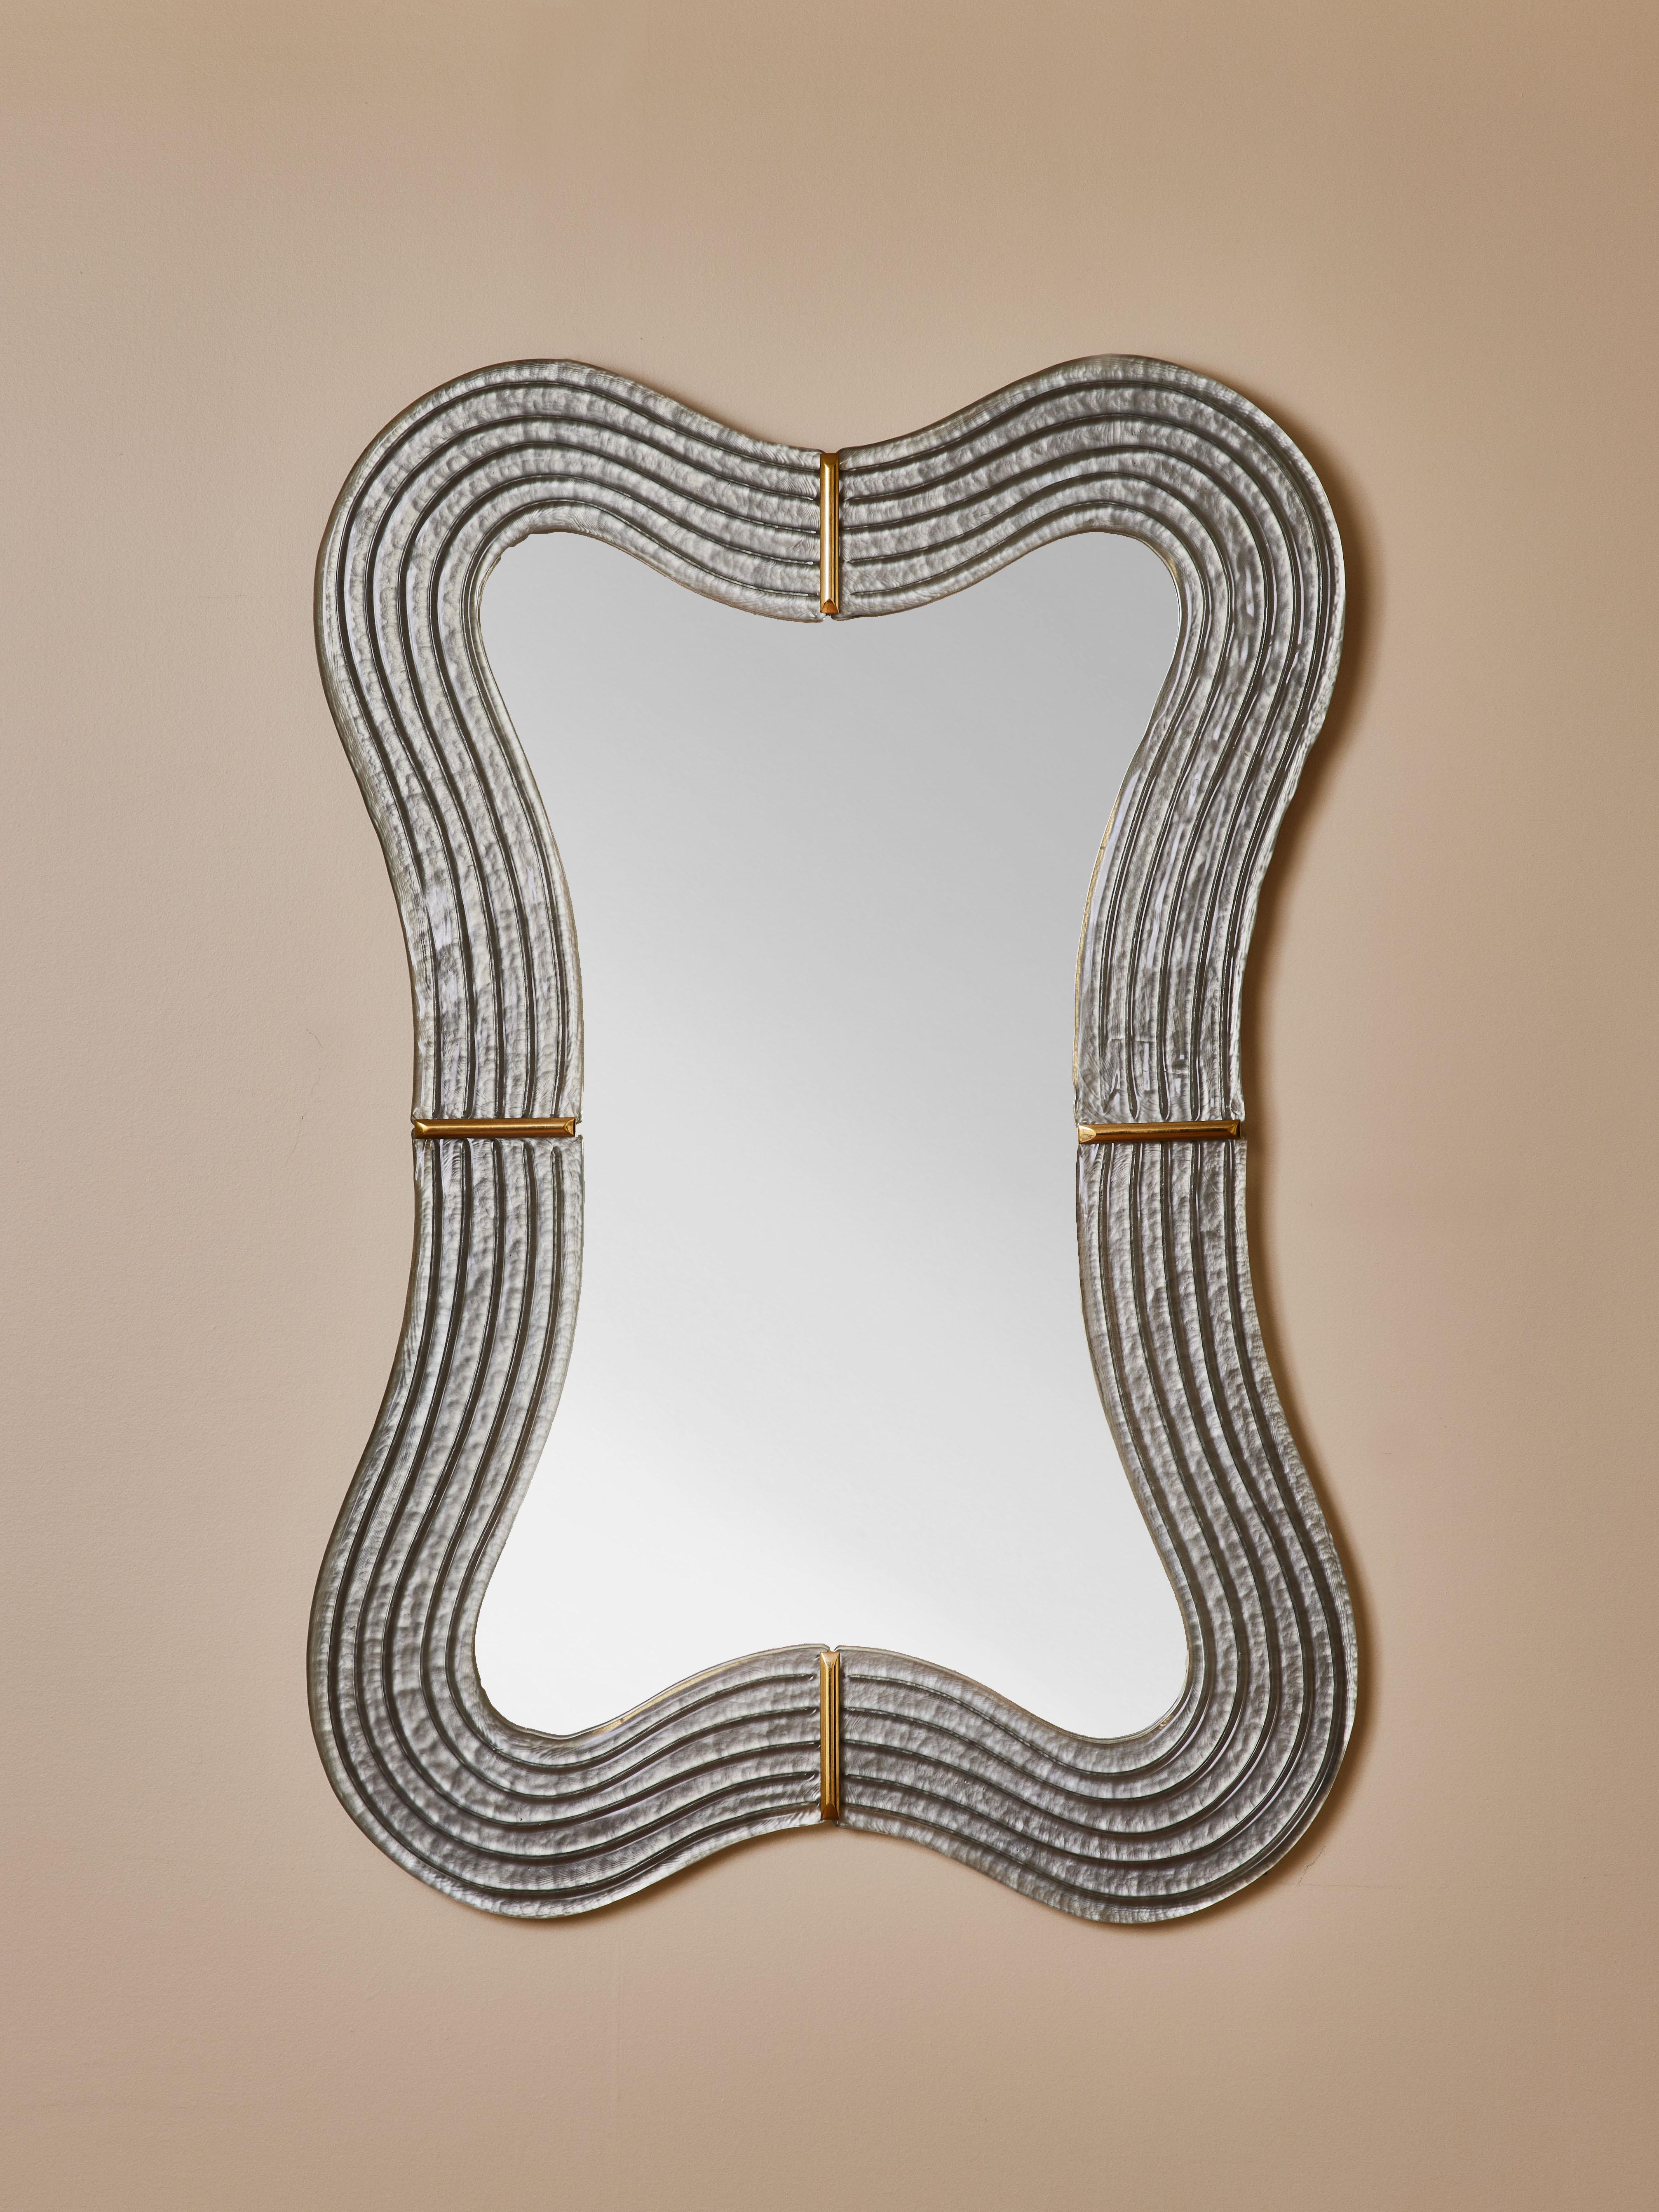 Mirror with frame in sculpted and tainted Murano glass.
Creation by Studio Glustin.